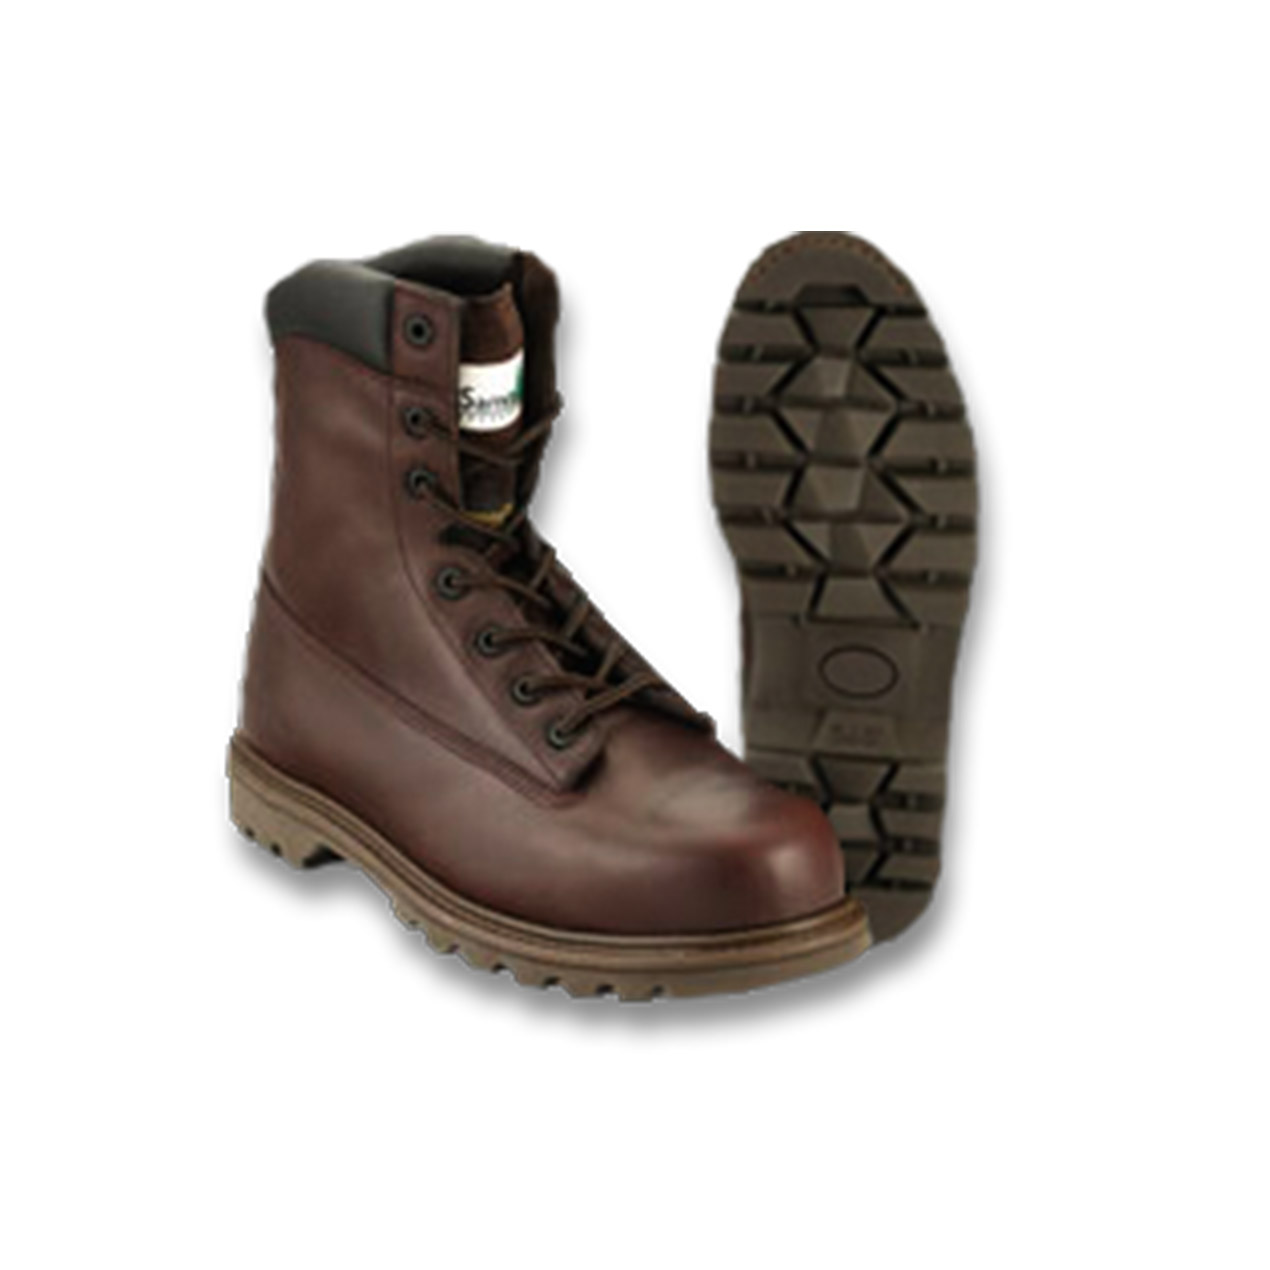 Samco - #B19 ASTM Composite Safety Toe Boot #1219C